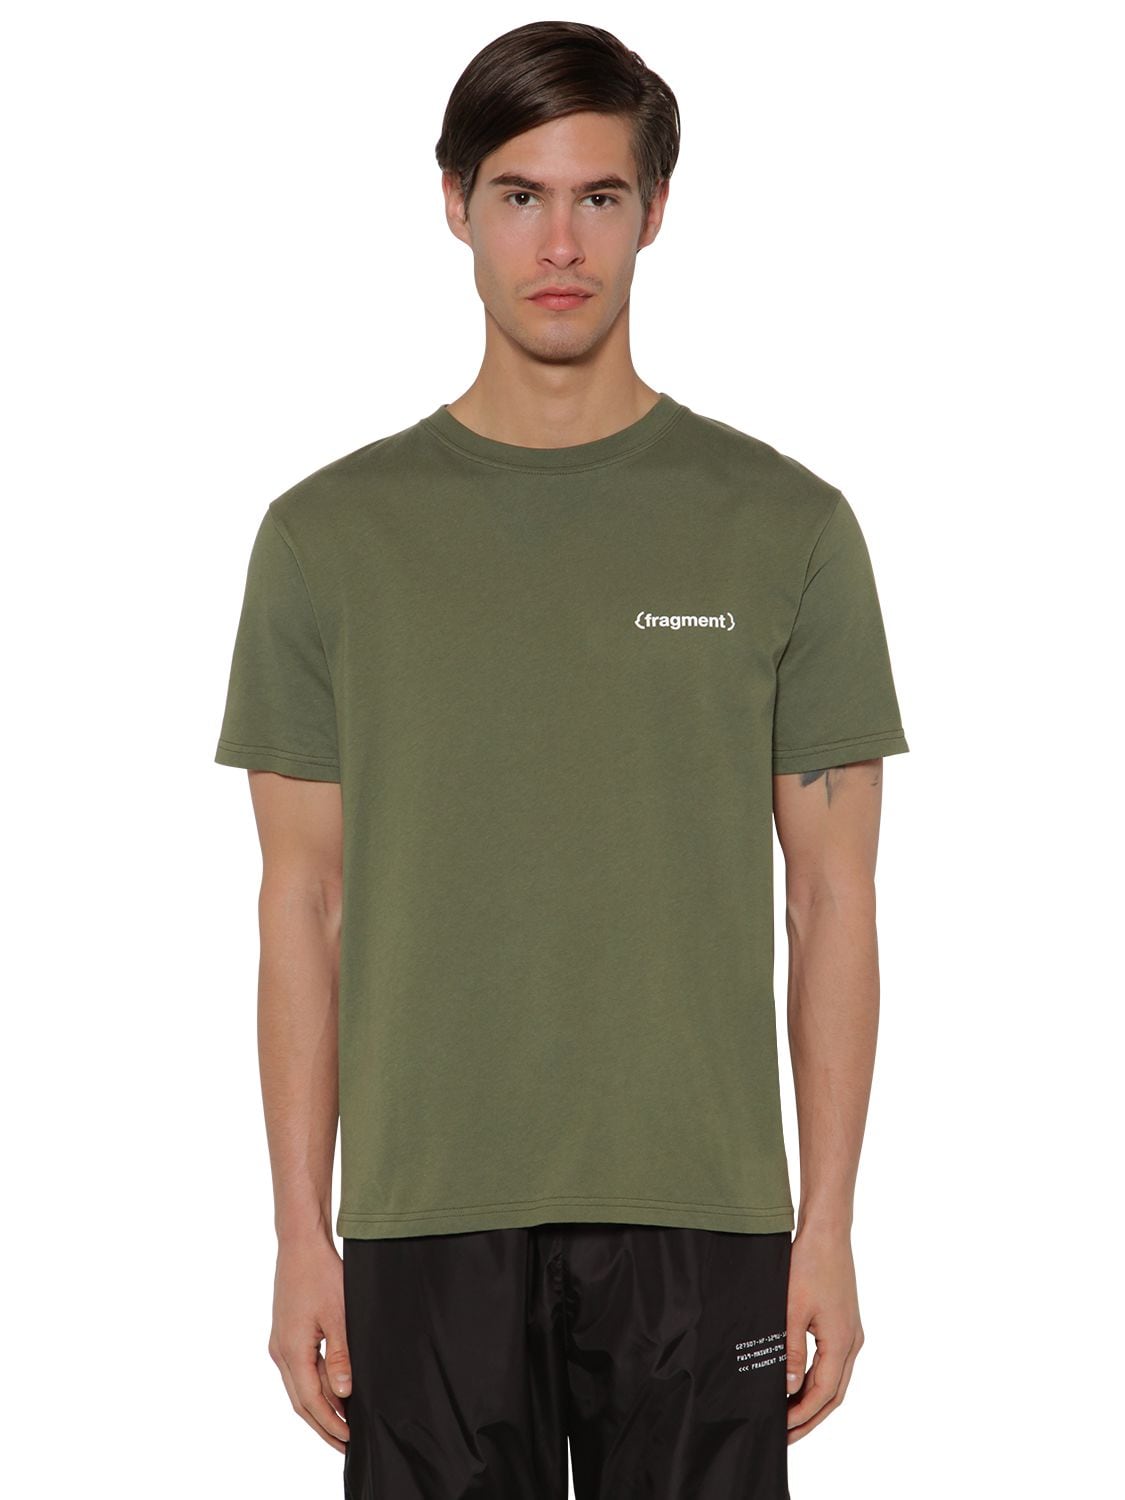 Moncler Genius Fragment Cotton Jersey T-shirt In Olive Green